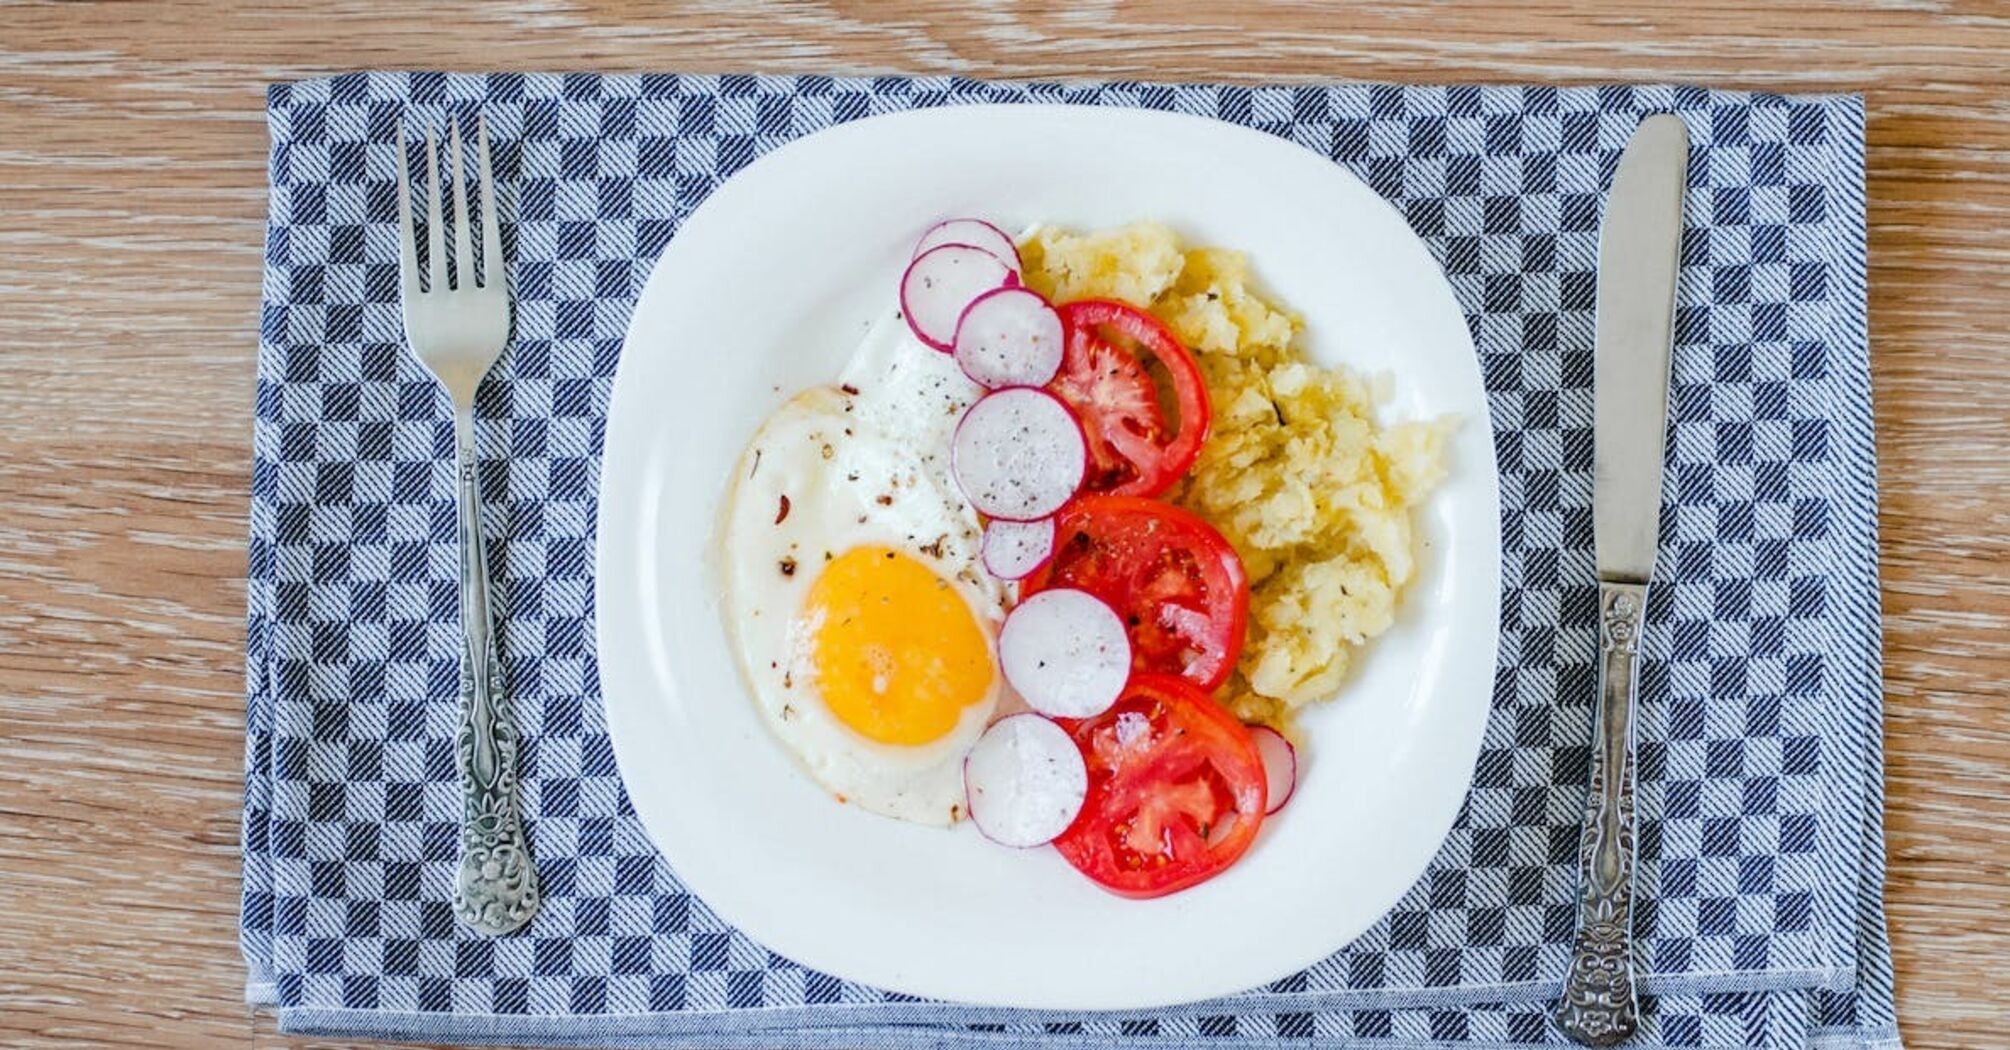 To have a healthy brain: doctor names two foods to add to morning scrambled eggs